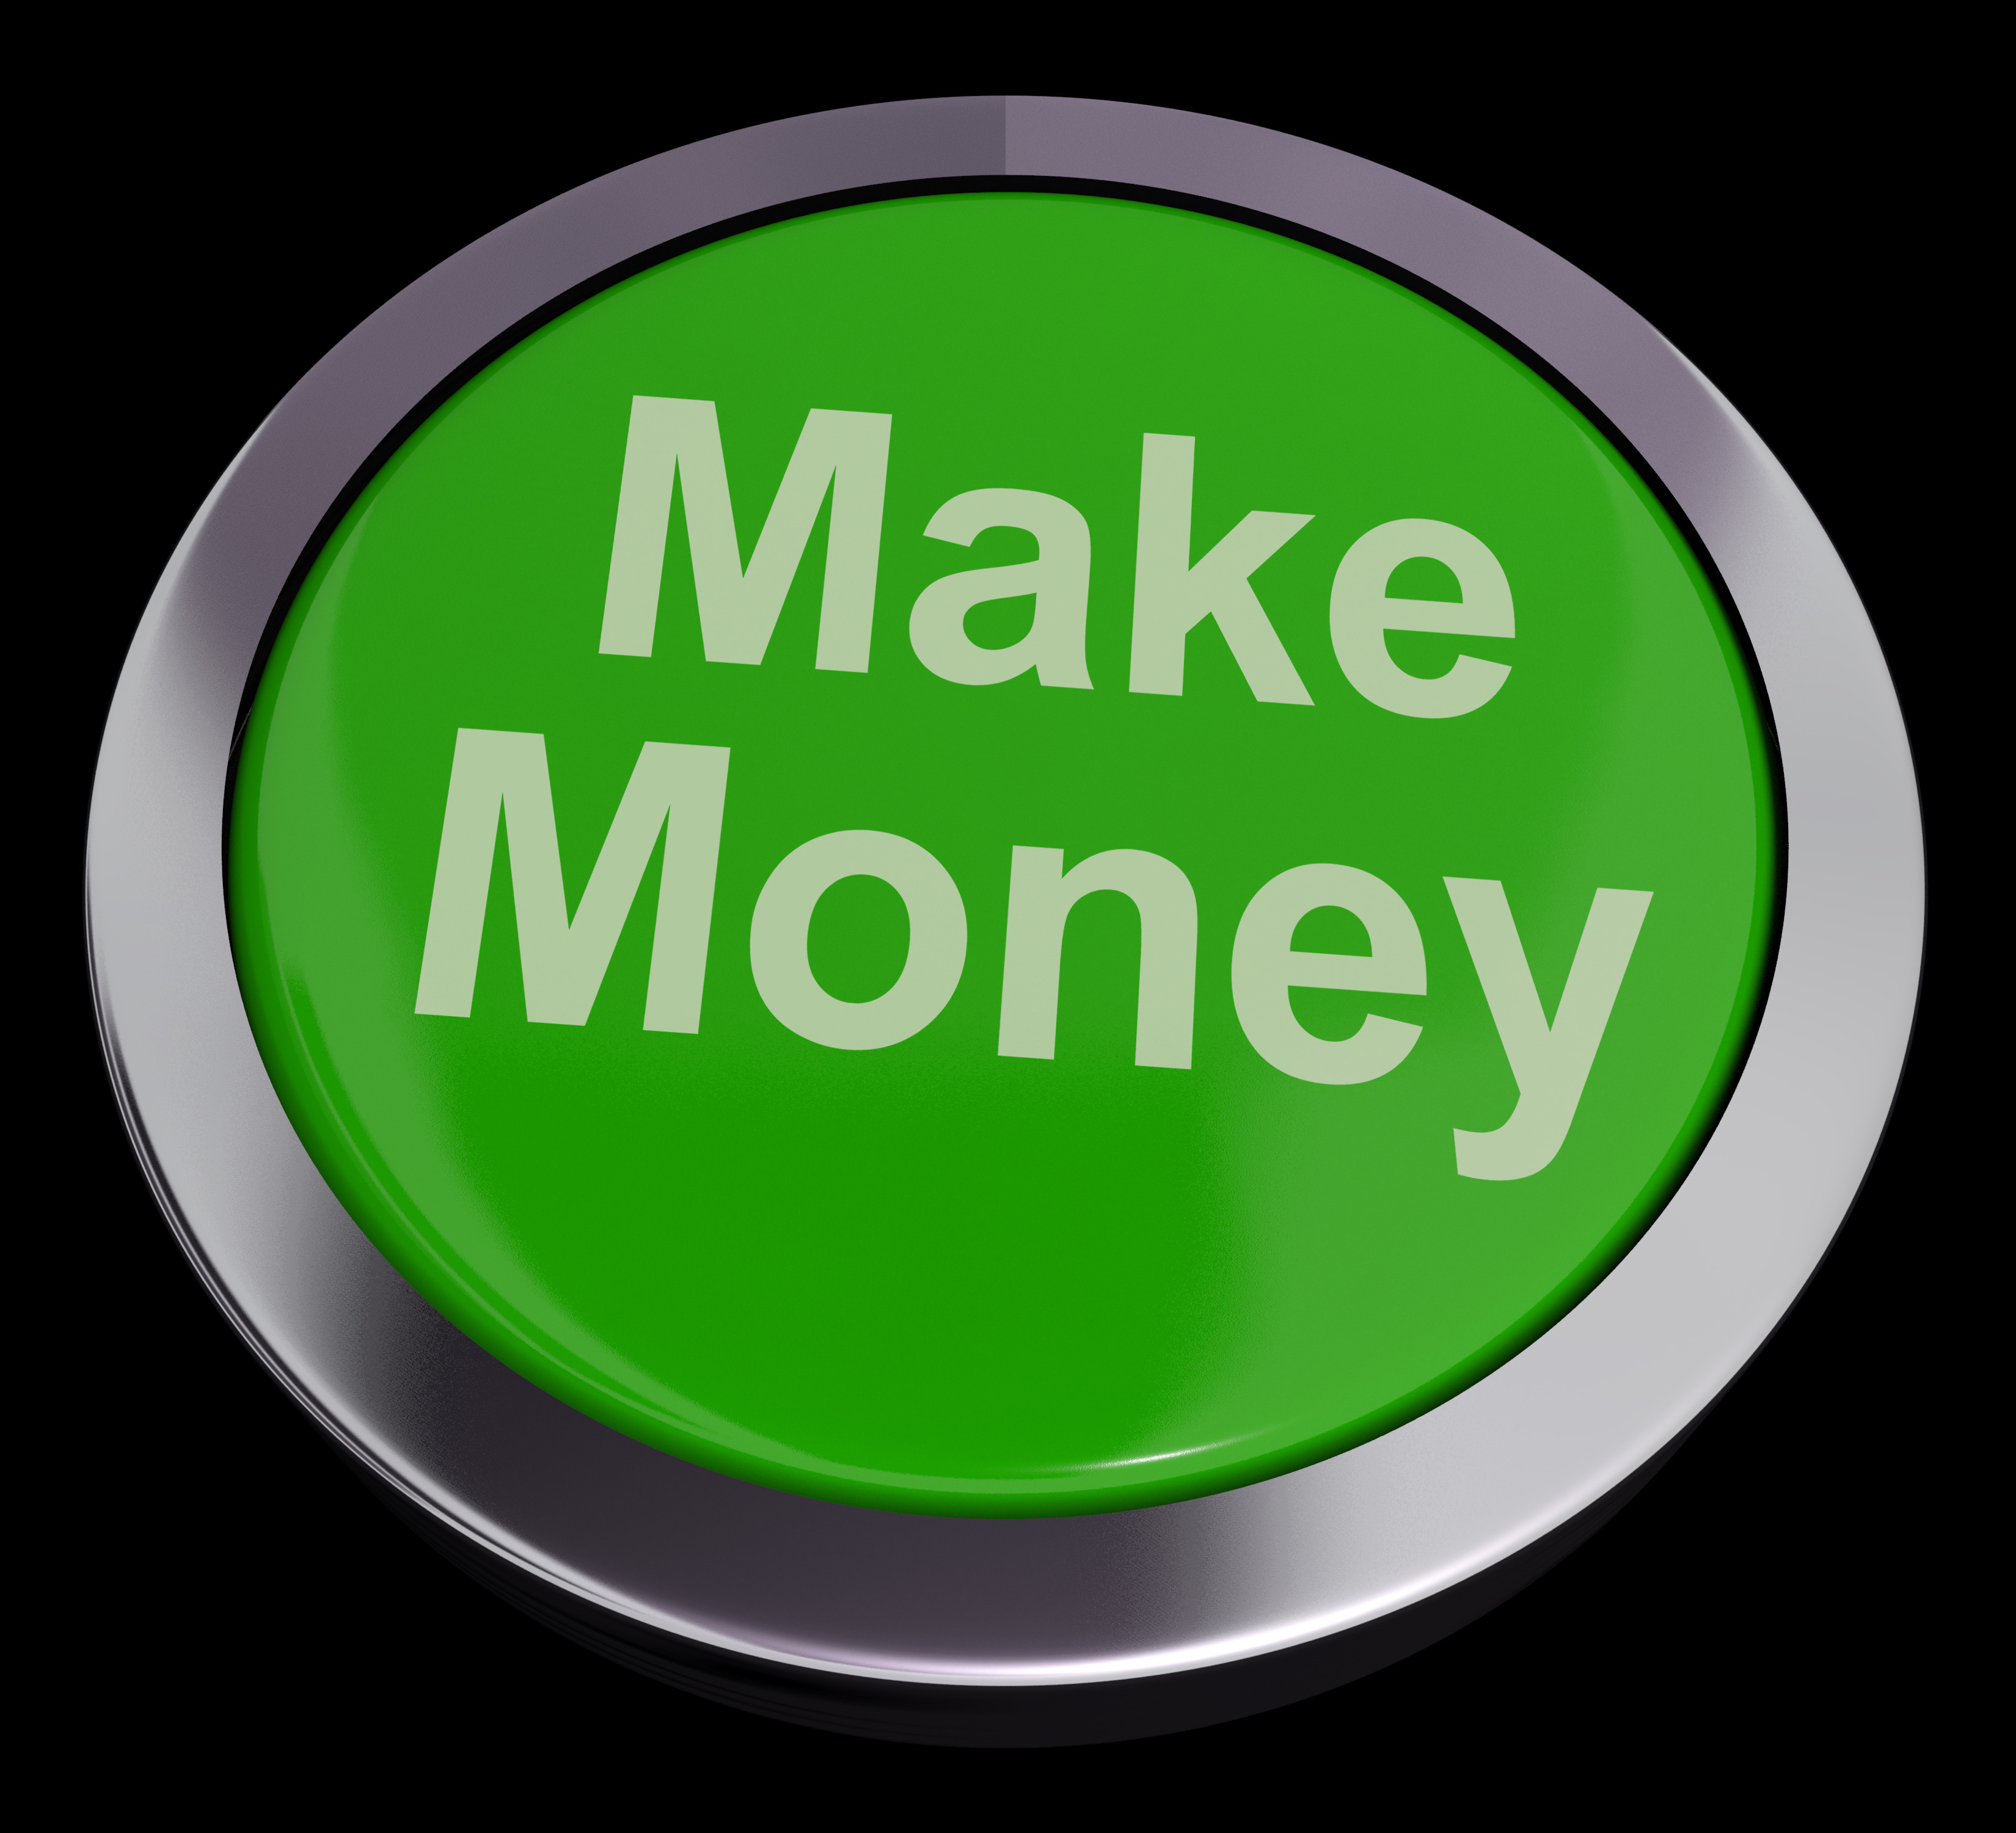 make money get started with no capital outlay